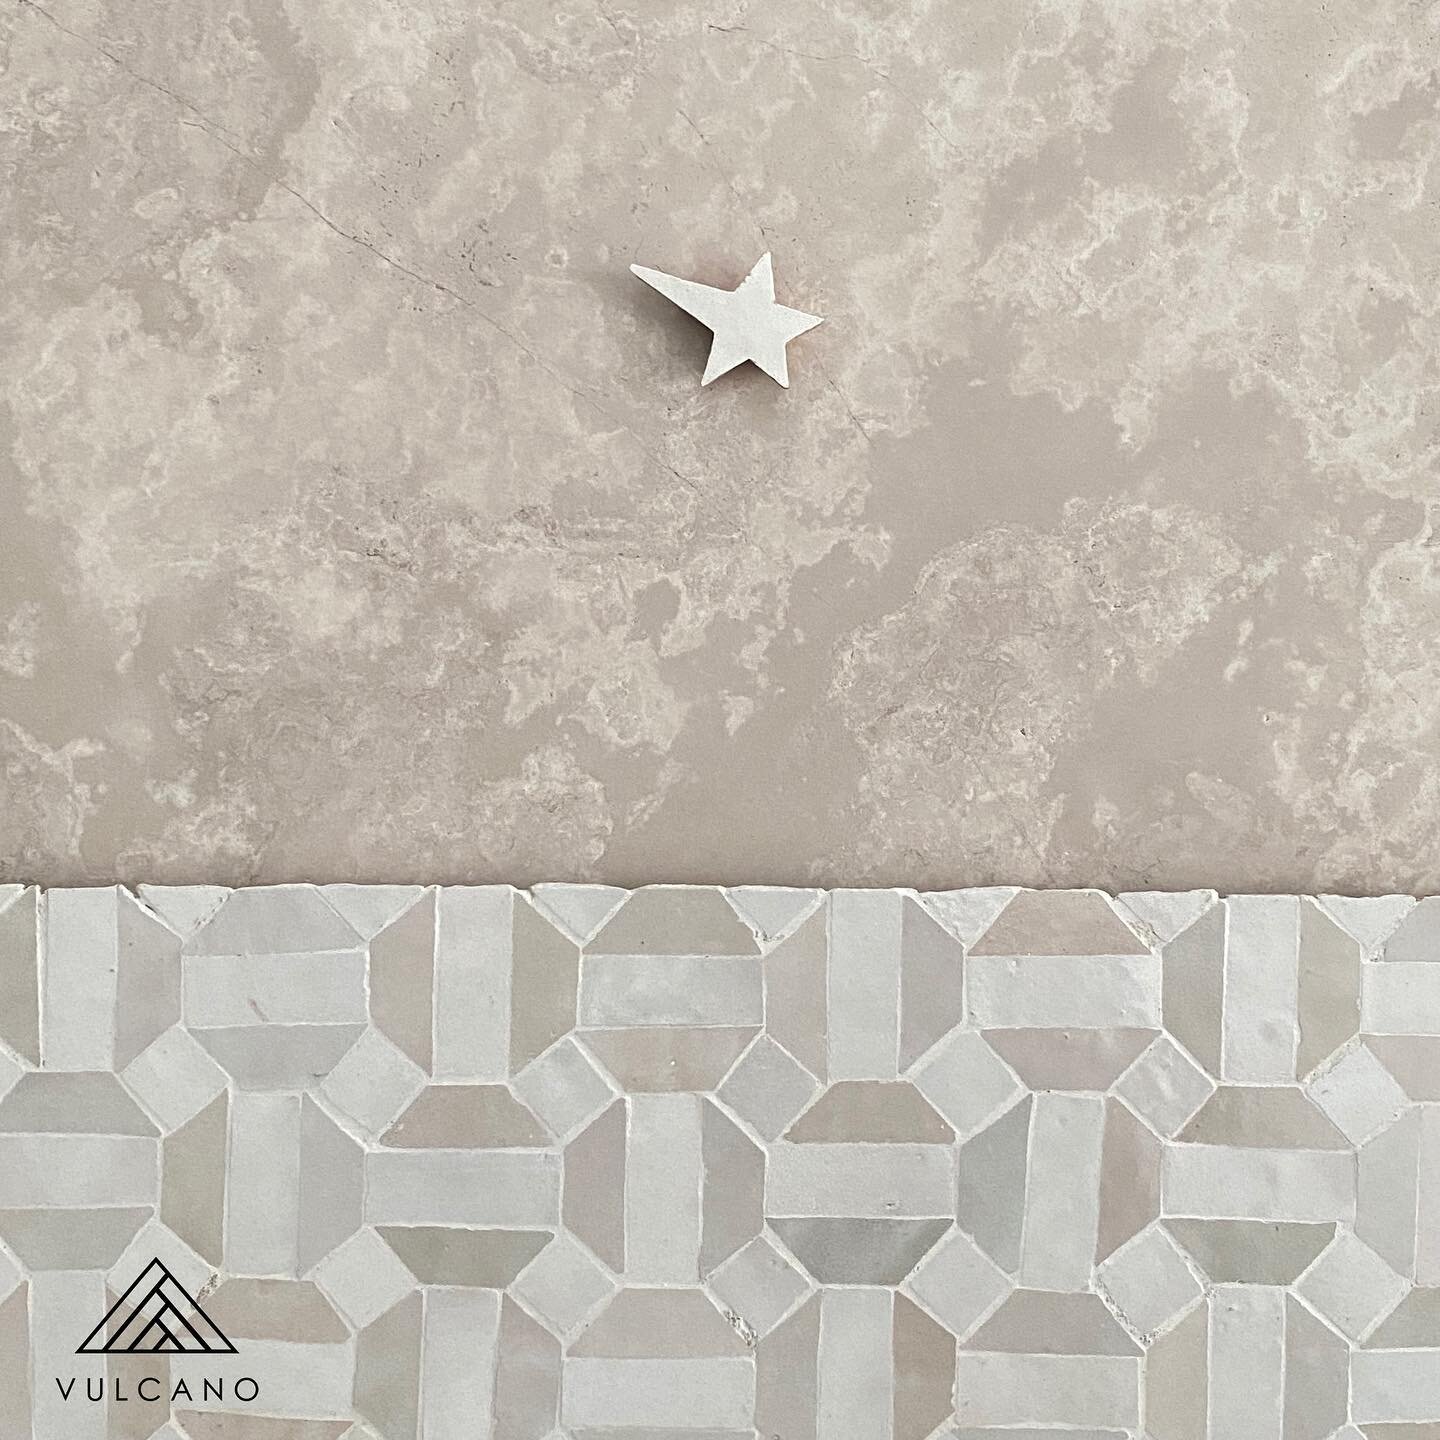 Zellige shooting Star flying through our silver cloud (limestone) with our Moroccan Panel as painted earth.. swipe ⏩⏩ for more on this beautiful stone.